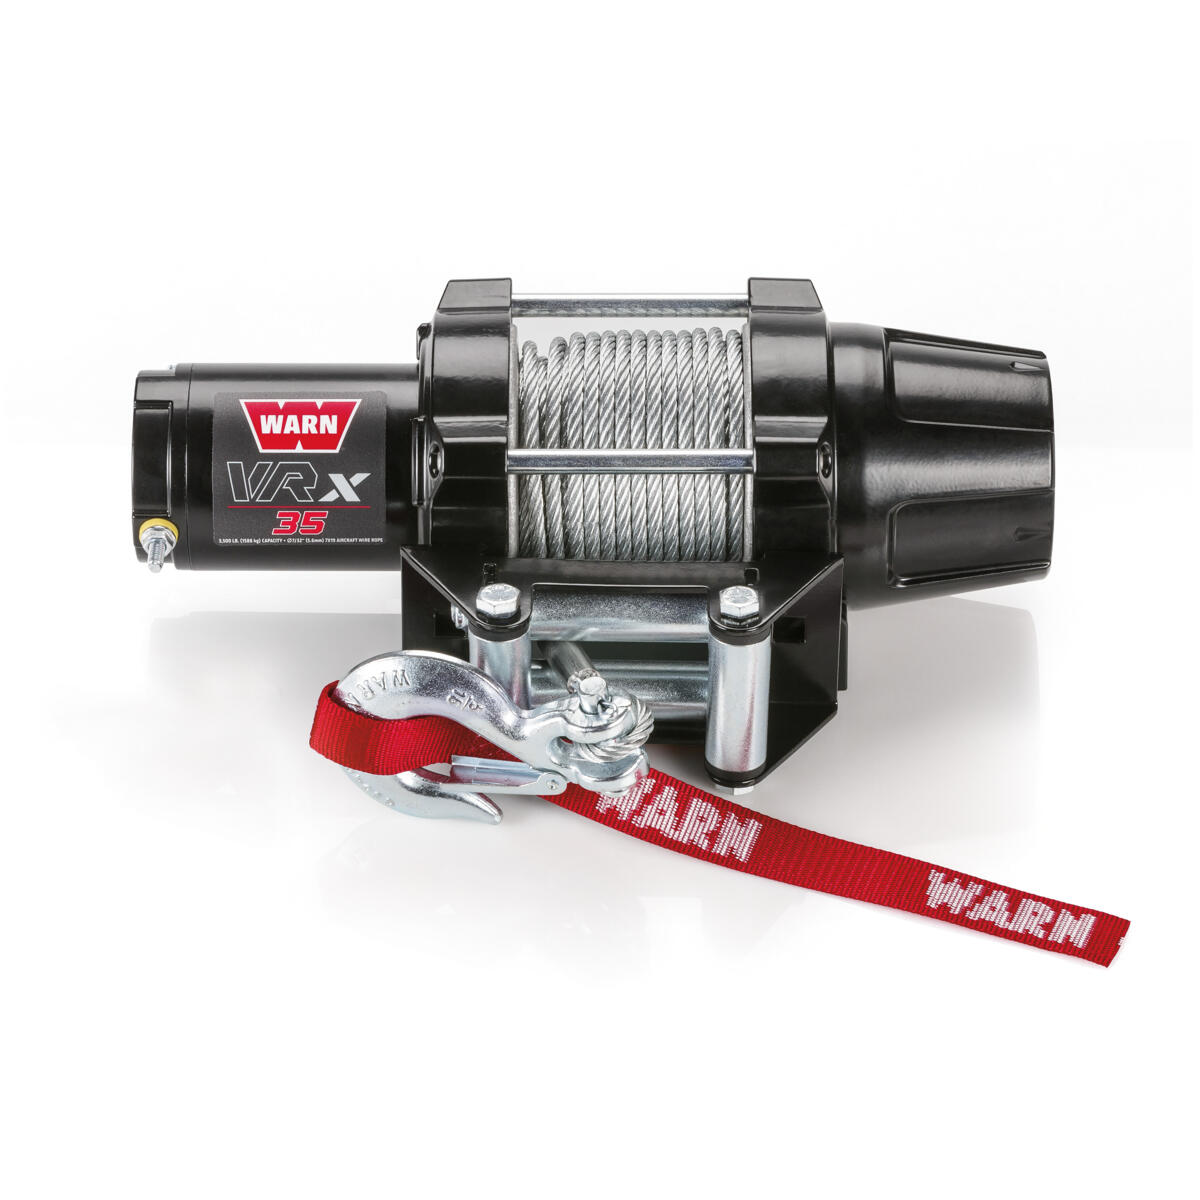 With its all-metal construction, the WARN® VRX Winch with 15,24meter of steel wire rope includes the new clutch developed from the WARN® 4WD hub lock design.